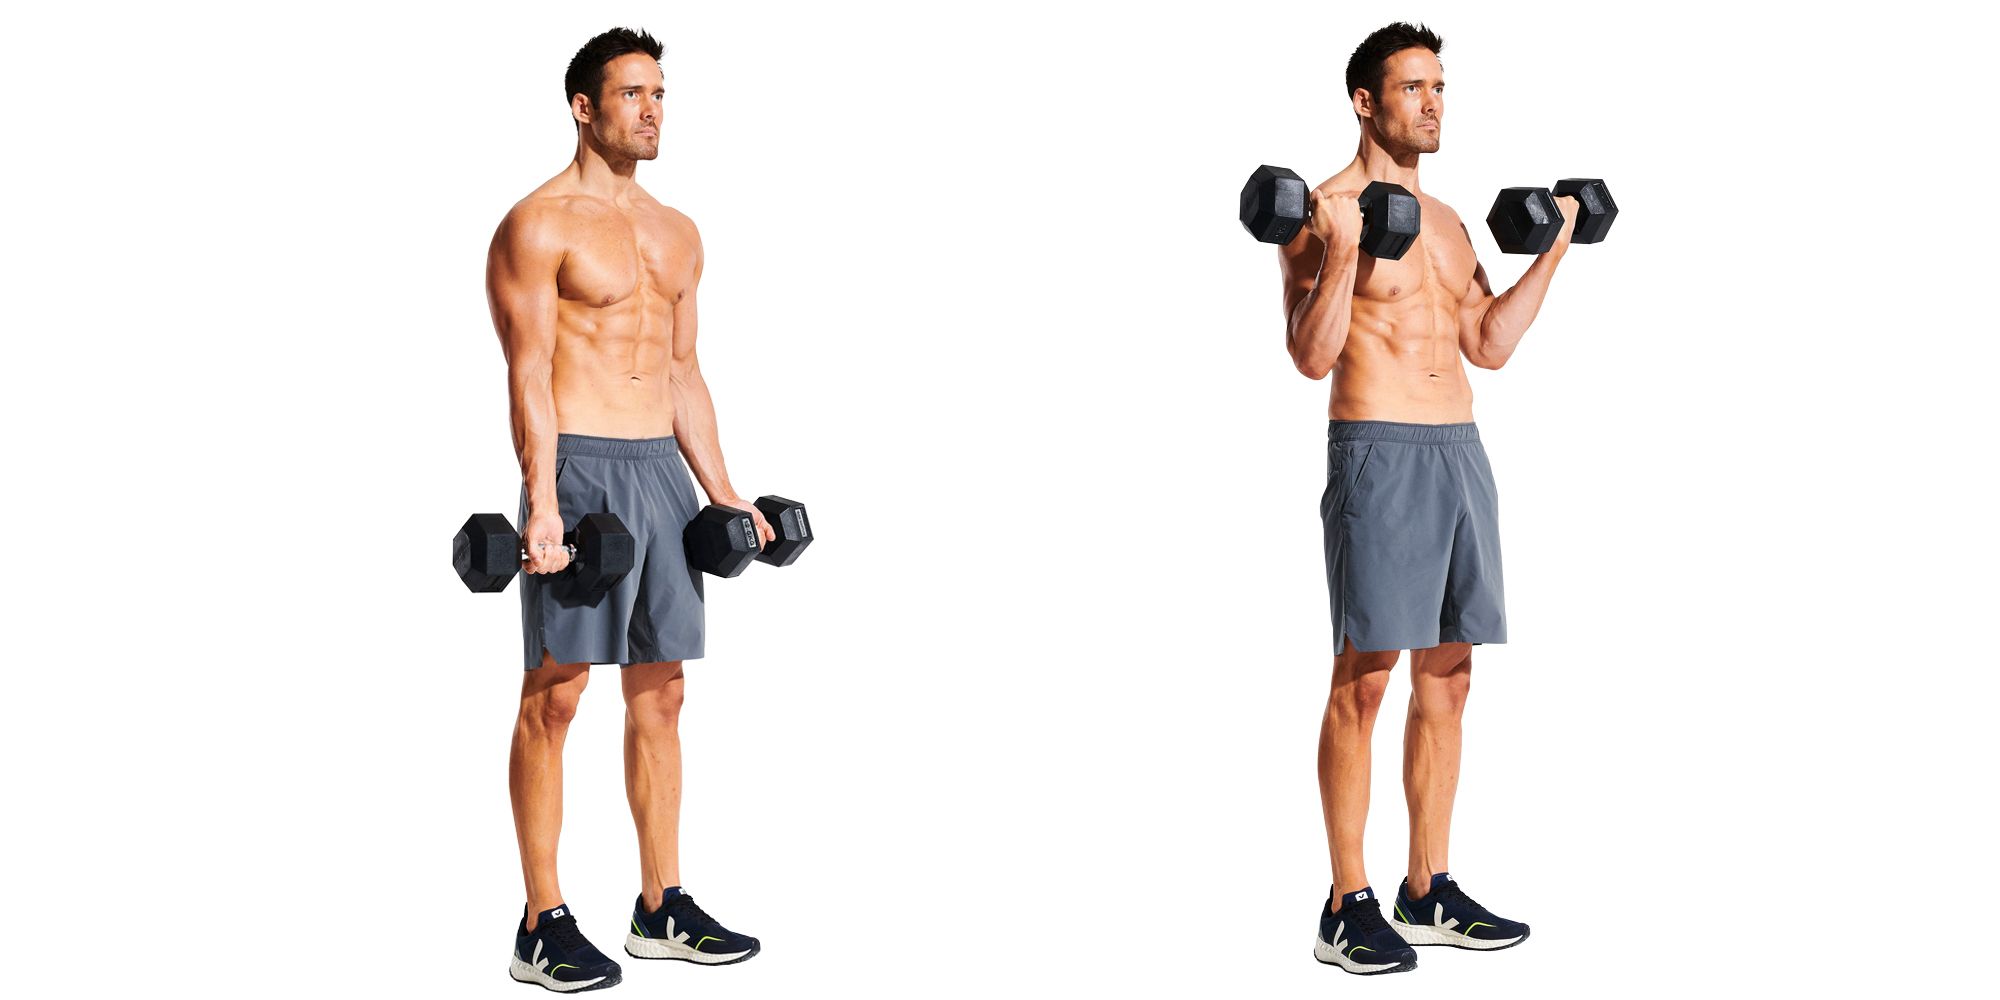 Arms Workout: Hit this Superset Finisher to Supersize Your Arms